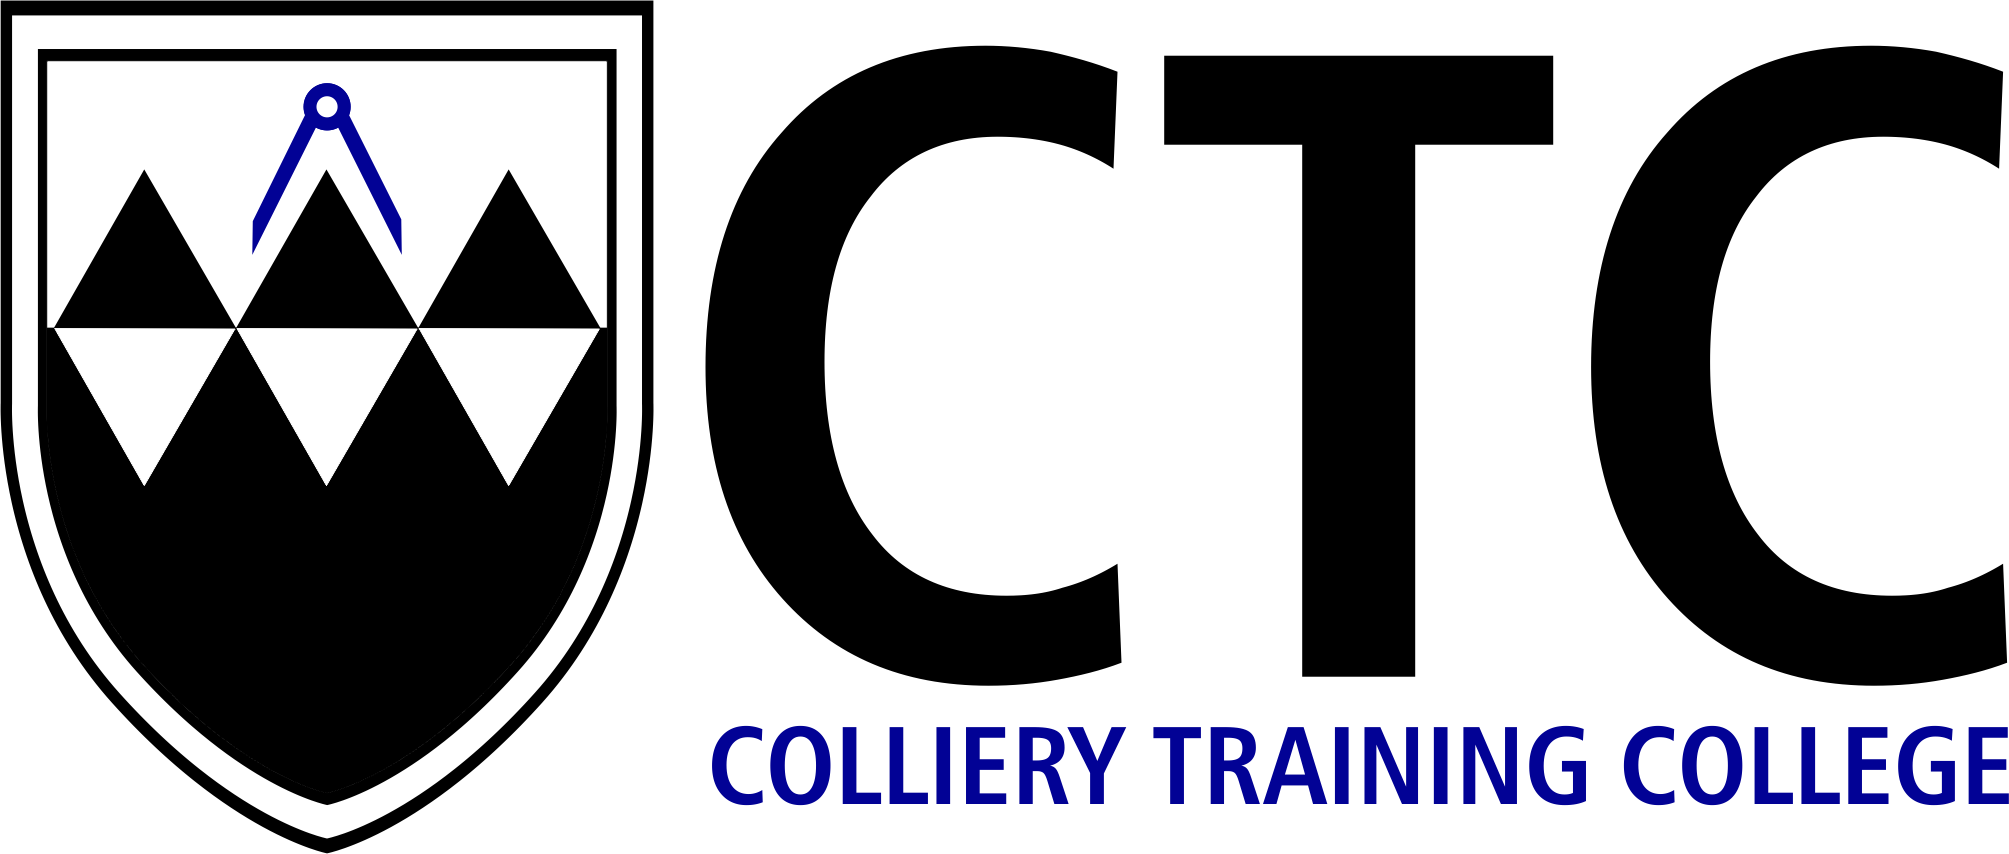 Permit to Work by Colliery Training College | Coursetakers.com